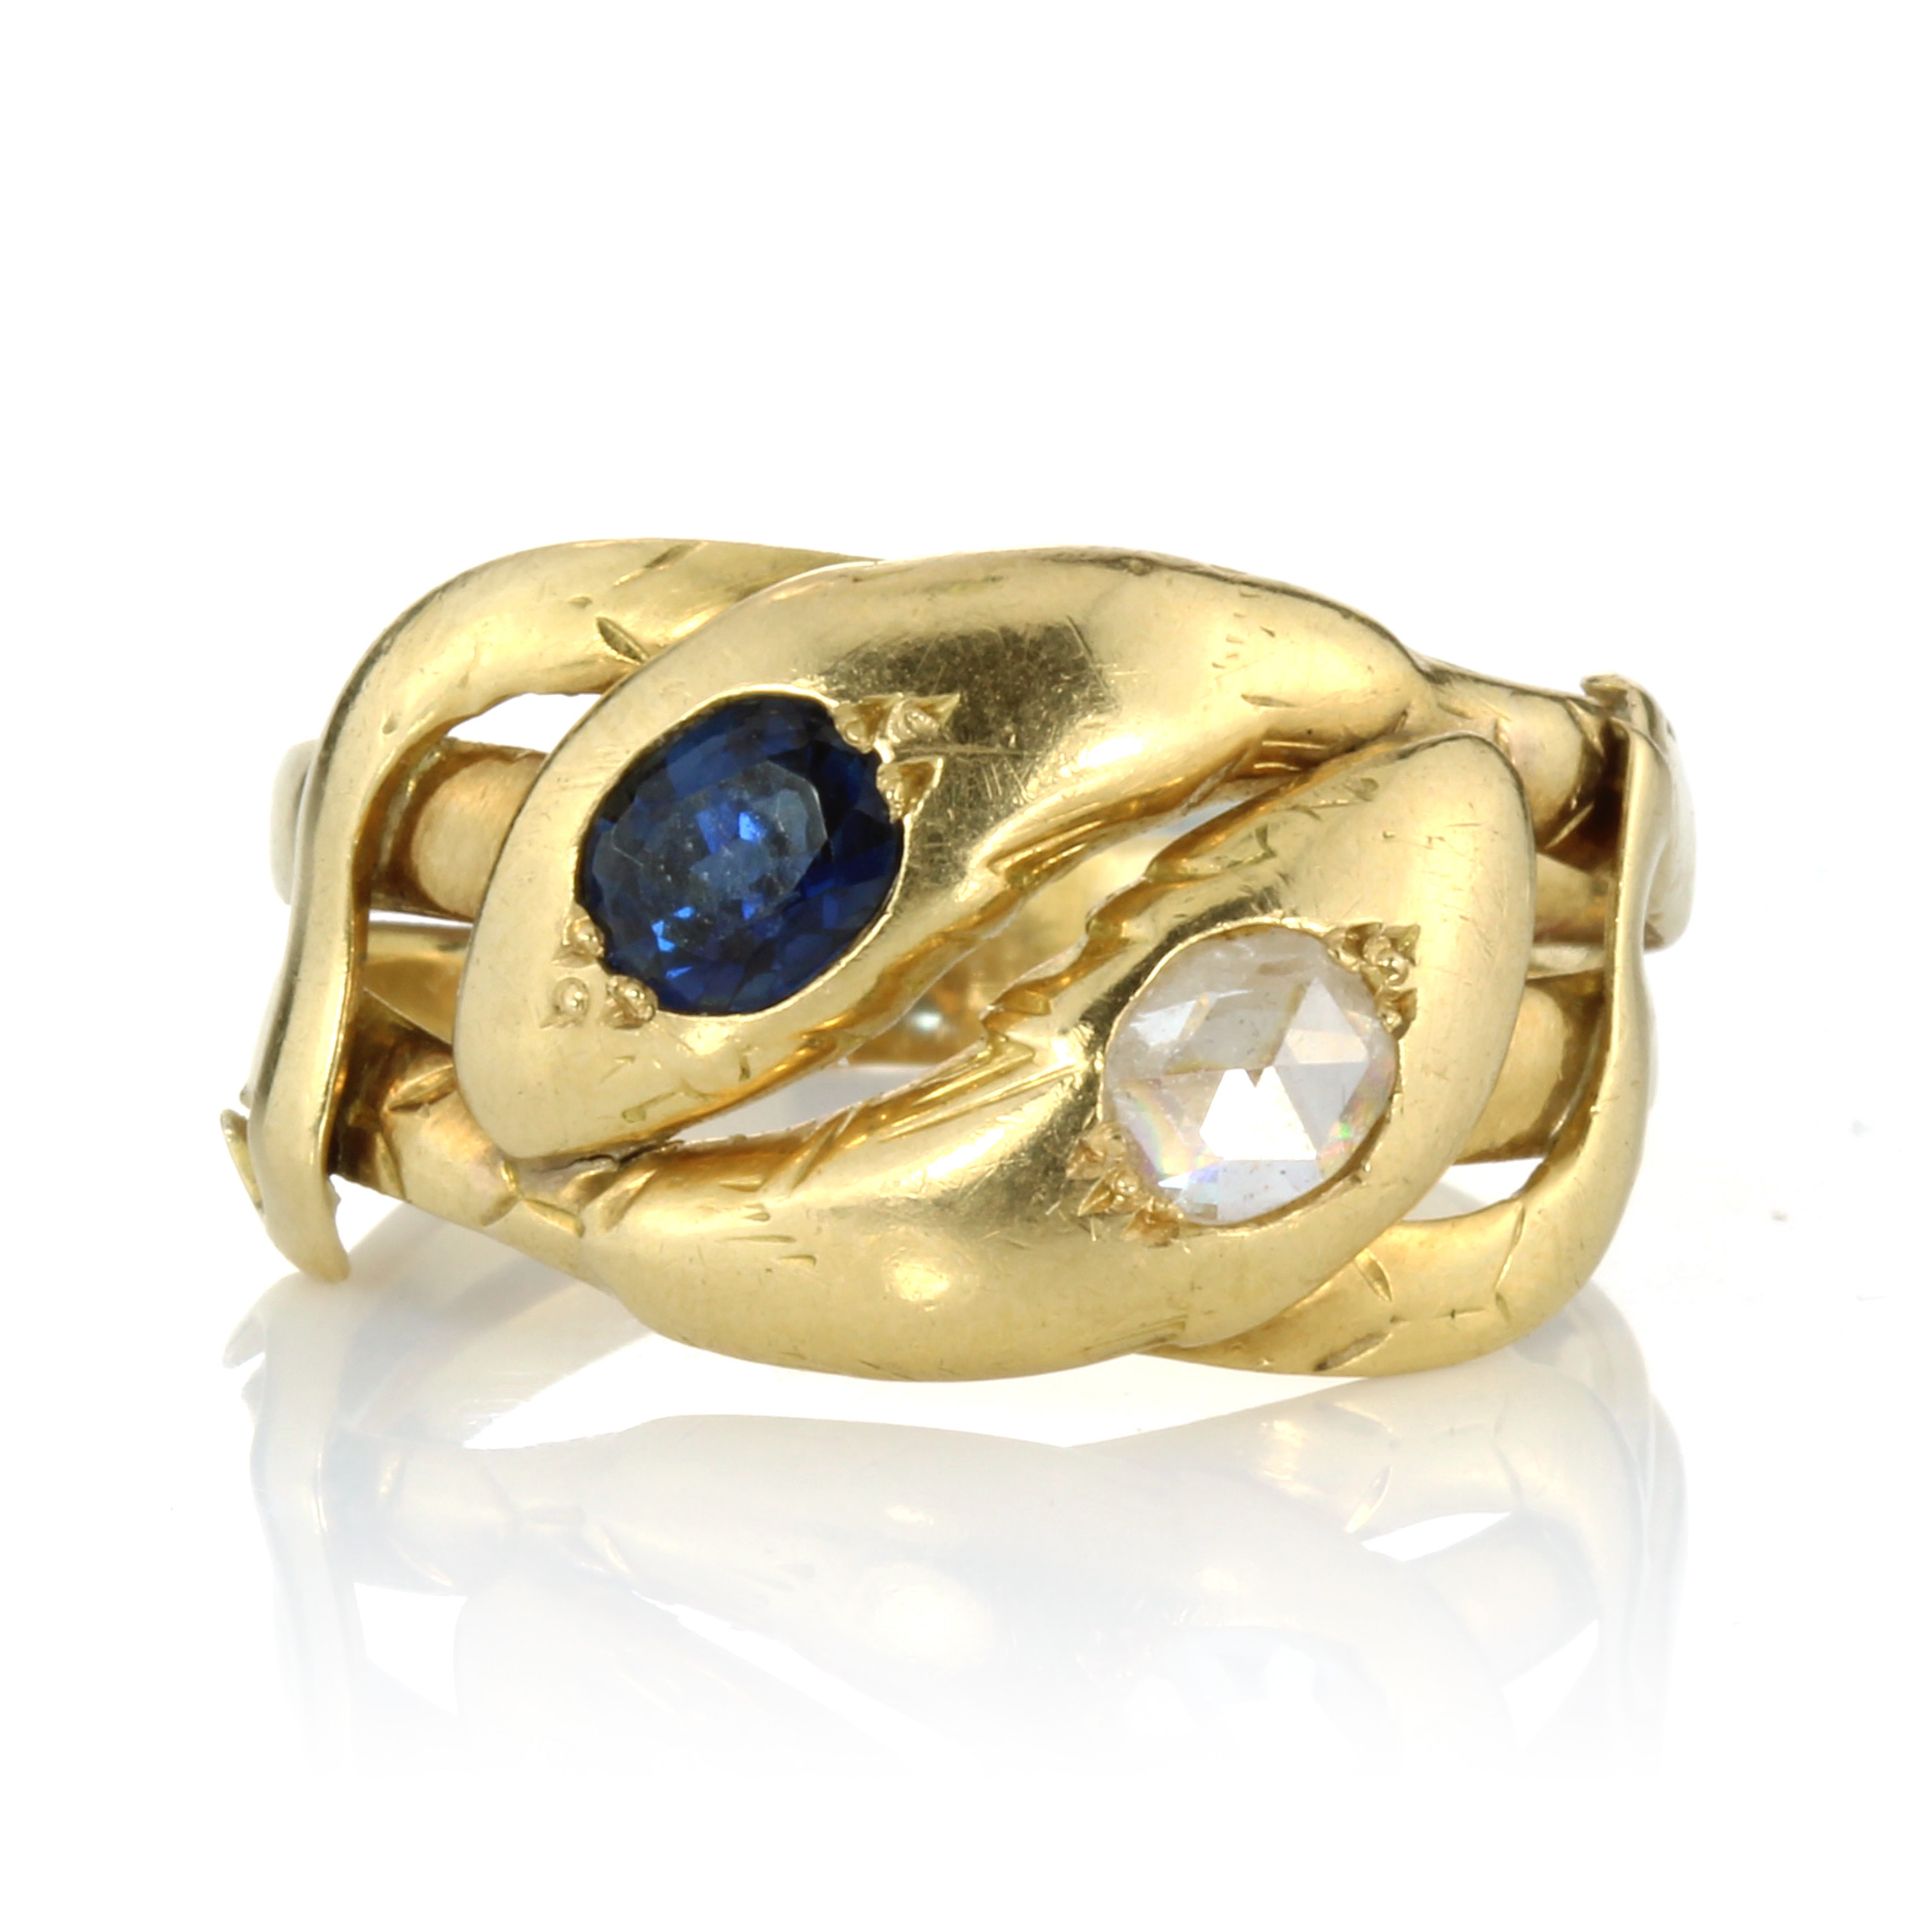 A SAPPHIRE AND DIAMOND DOUBLE HEADED SNAKE RING, CIRCA 1910 designed as two snakes, their bodies